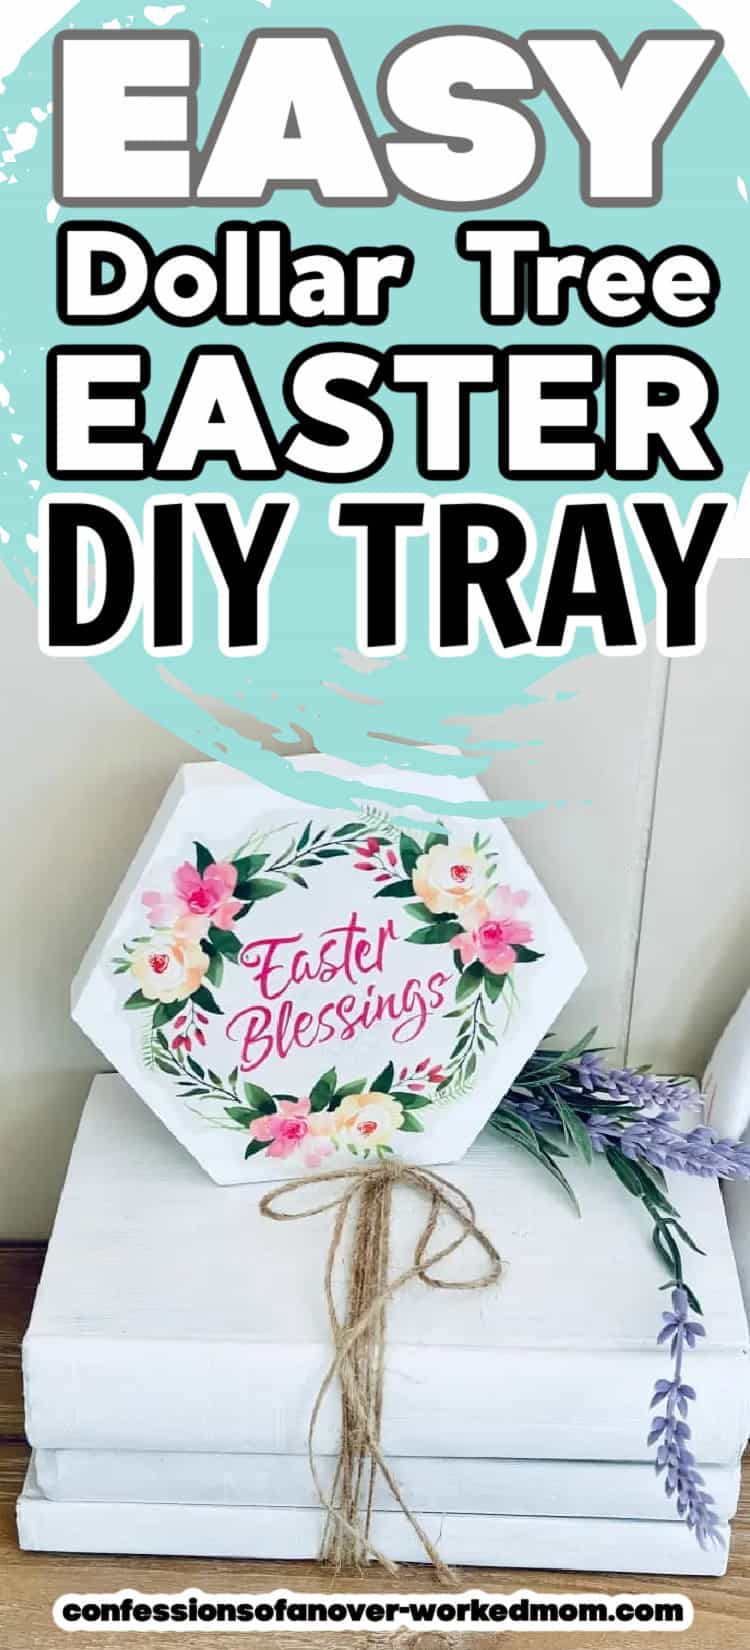 Check out this Dollar Tree Easter DIY! If you are looking for Dollar Tree Easter decorations, make this Blessing Tray with supplies from your local dollar store.